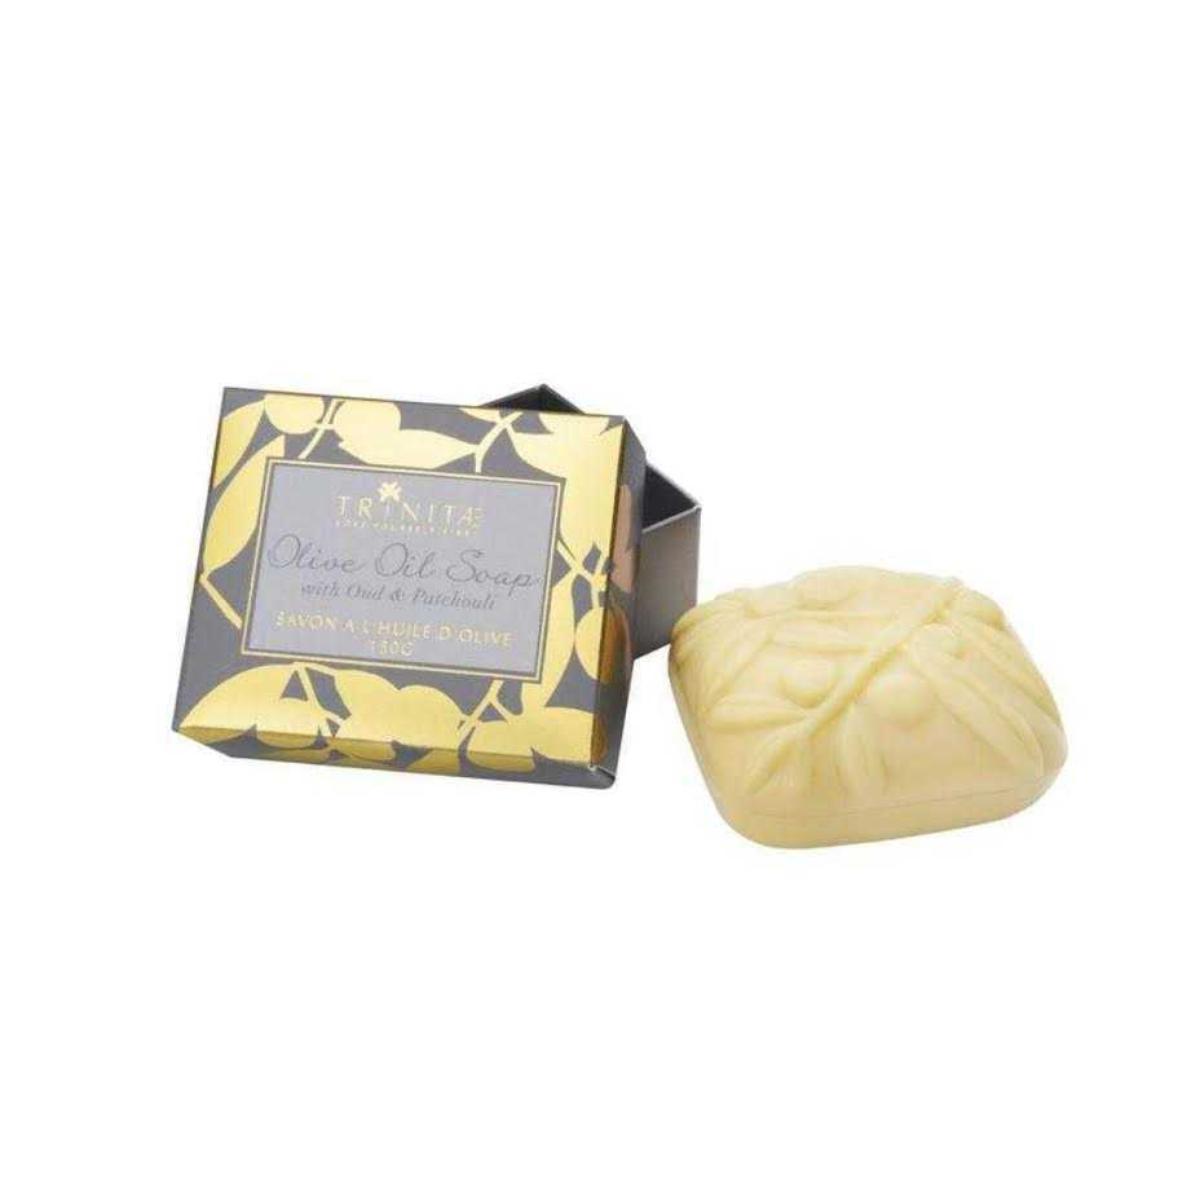 Olive Oil Soap with Oud & Patchouli